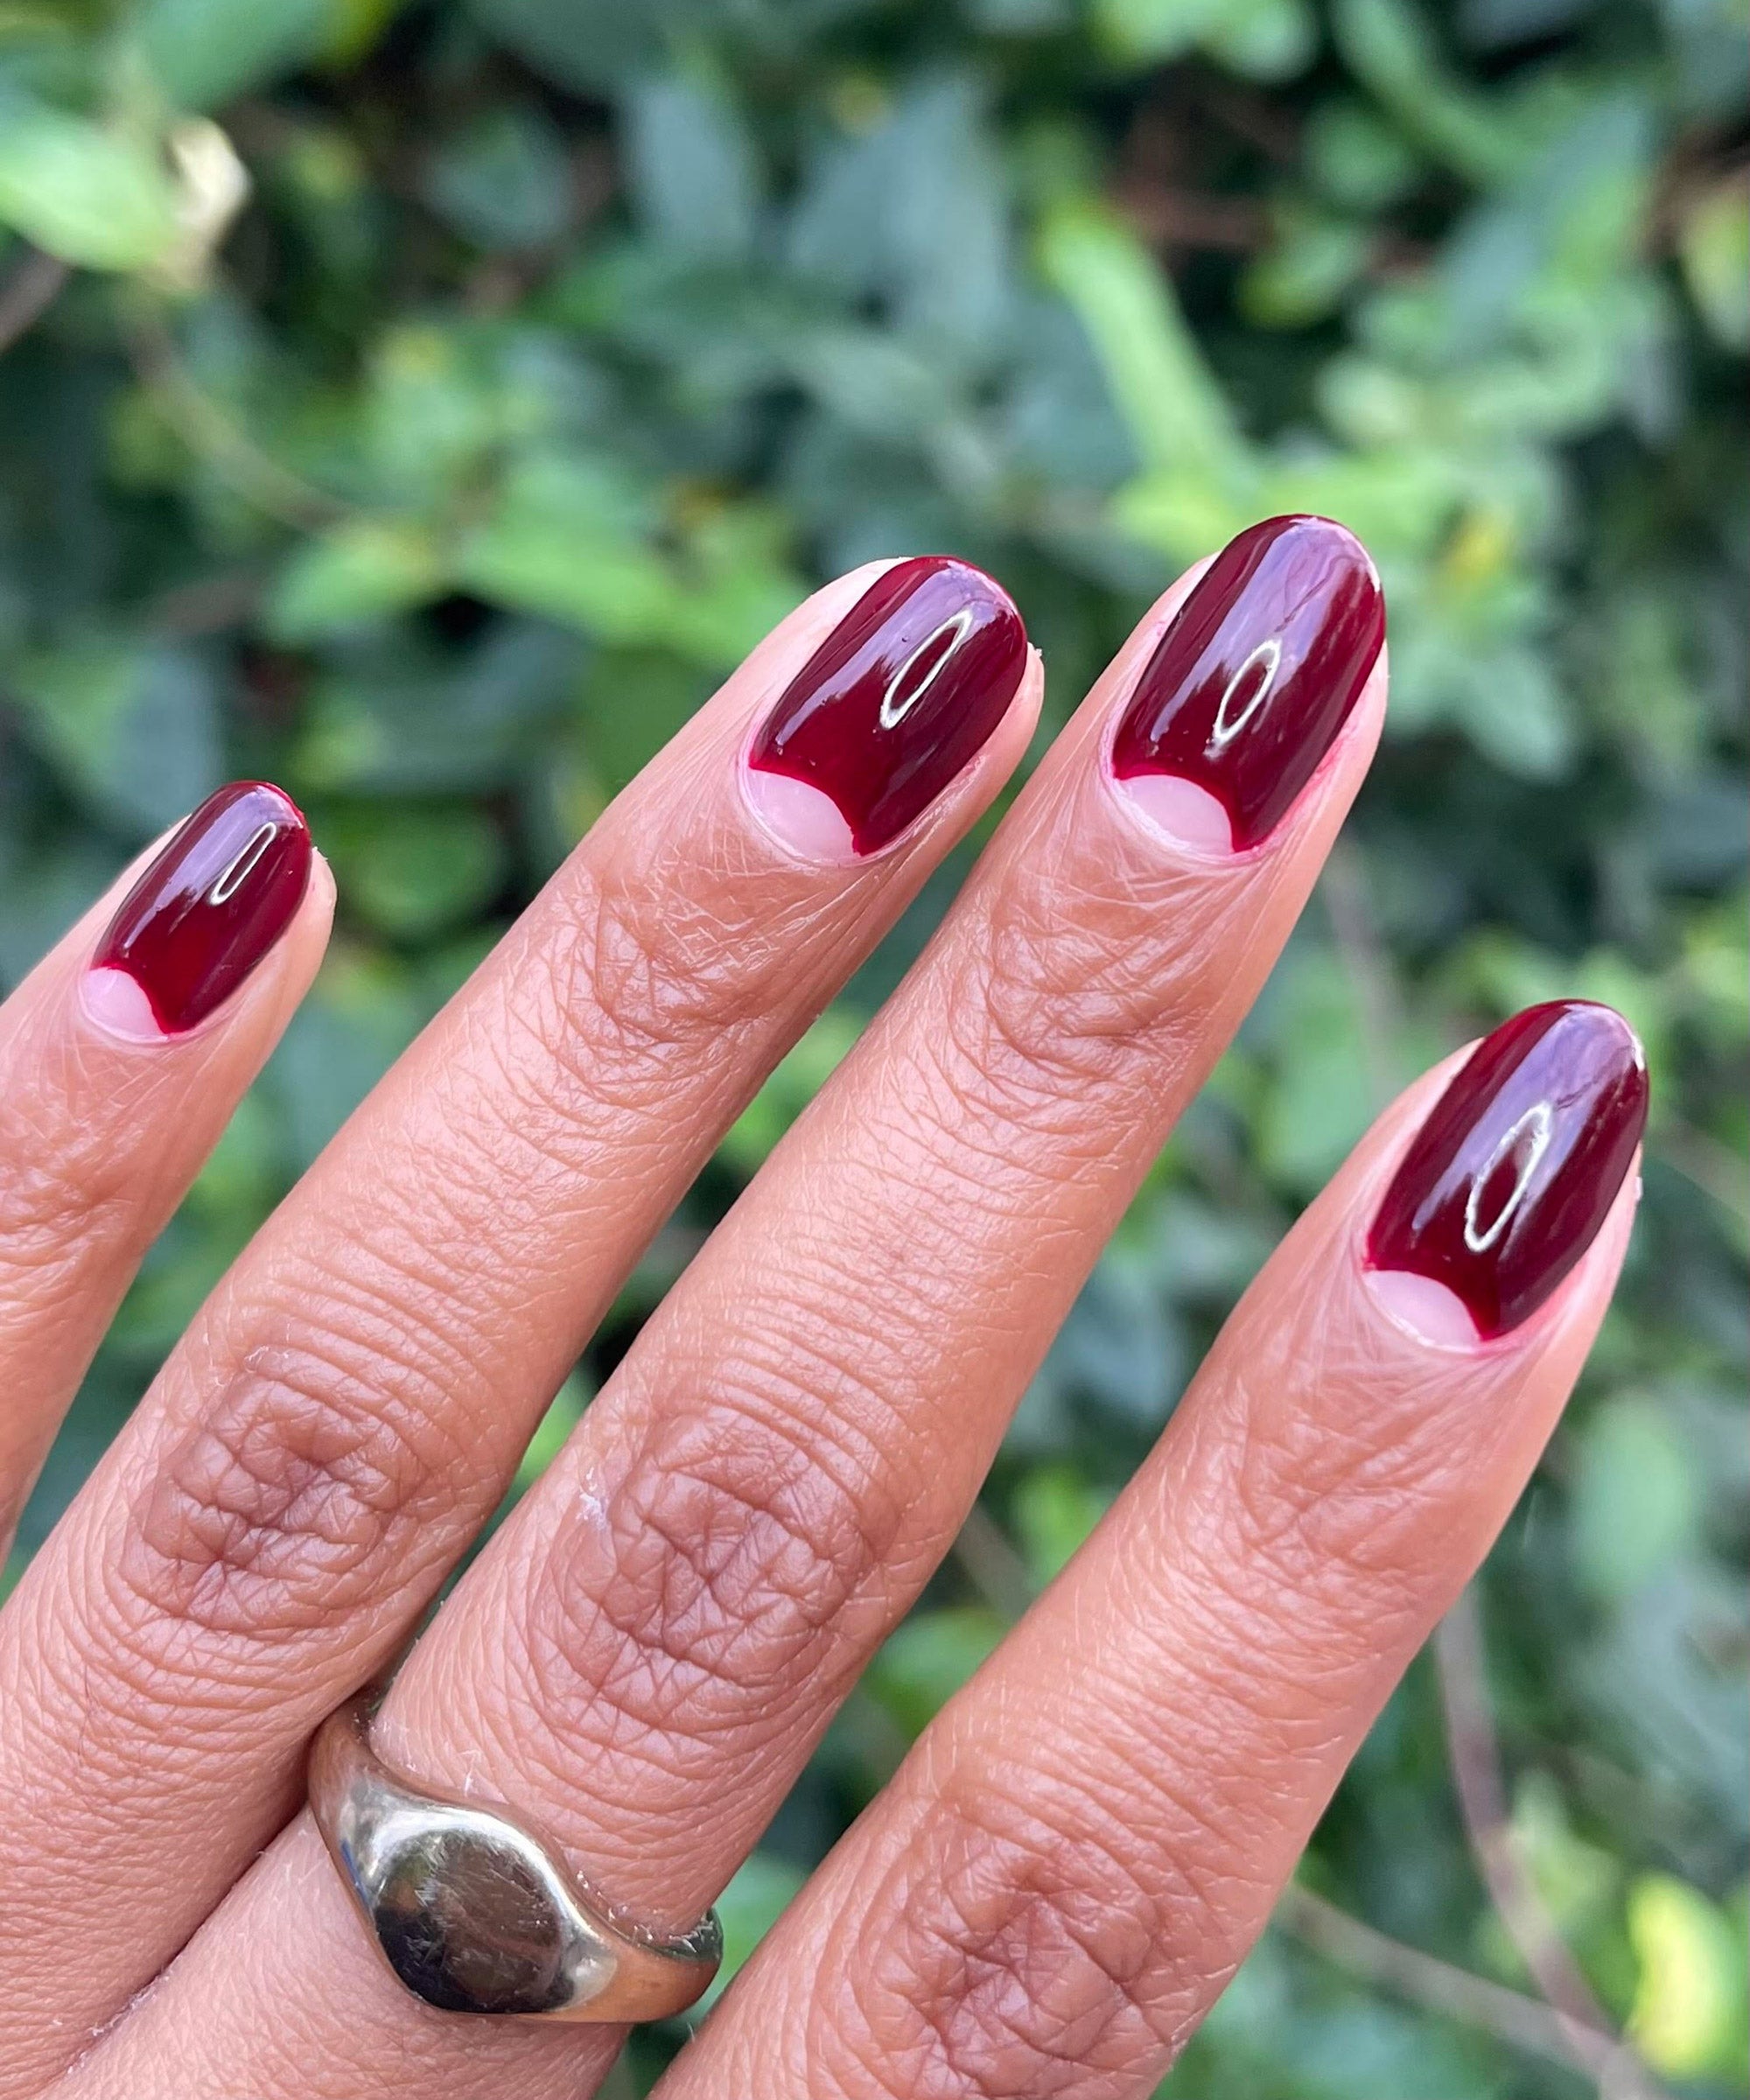 Cherry Red Nails Ideas: The Best 10 Brands | Filsofashion | Cherry nails,  Wine nails, Deep red nails